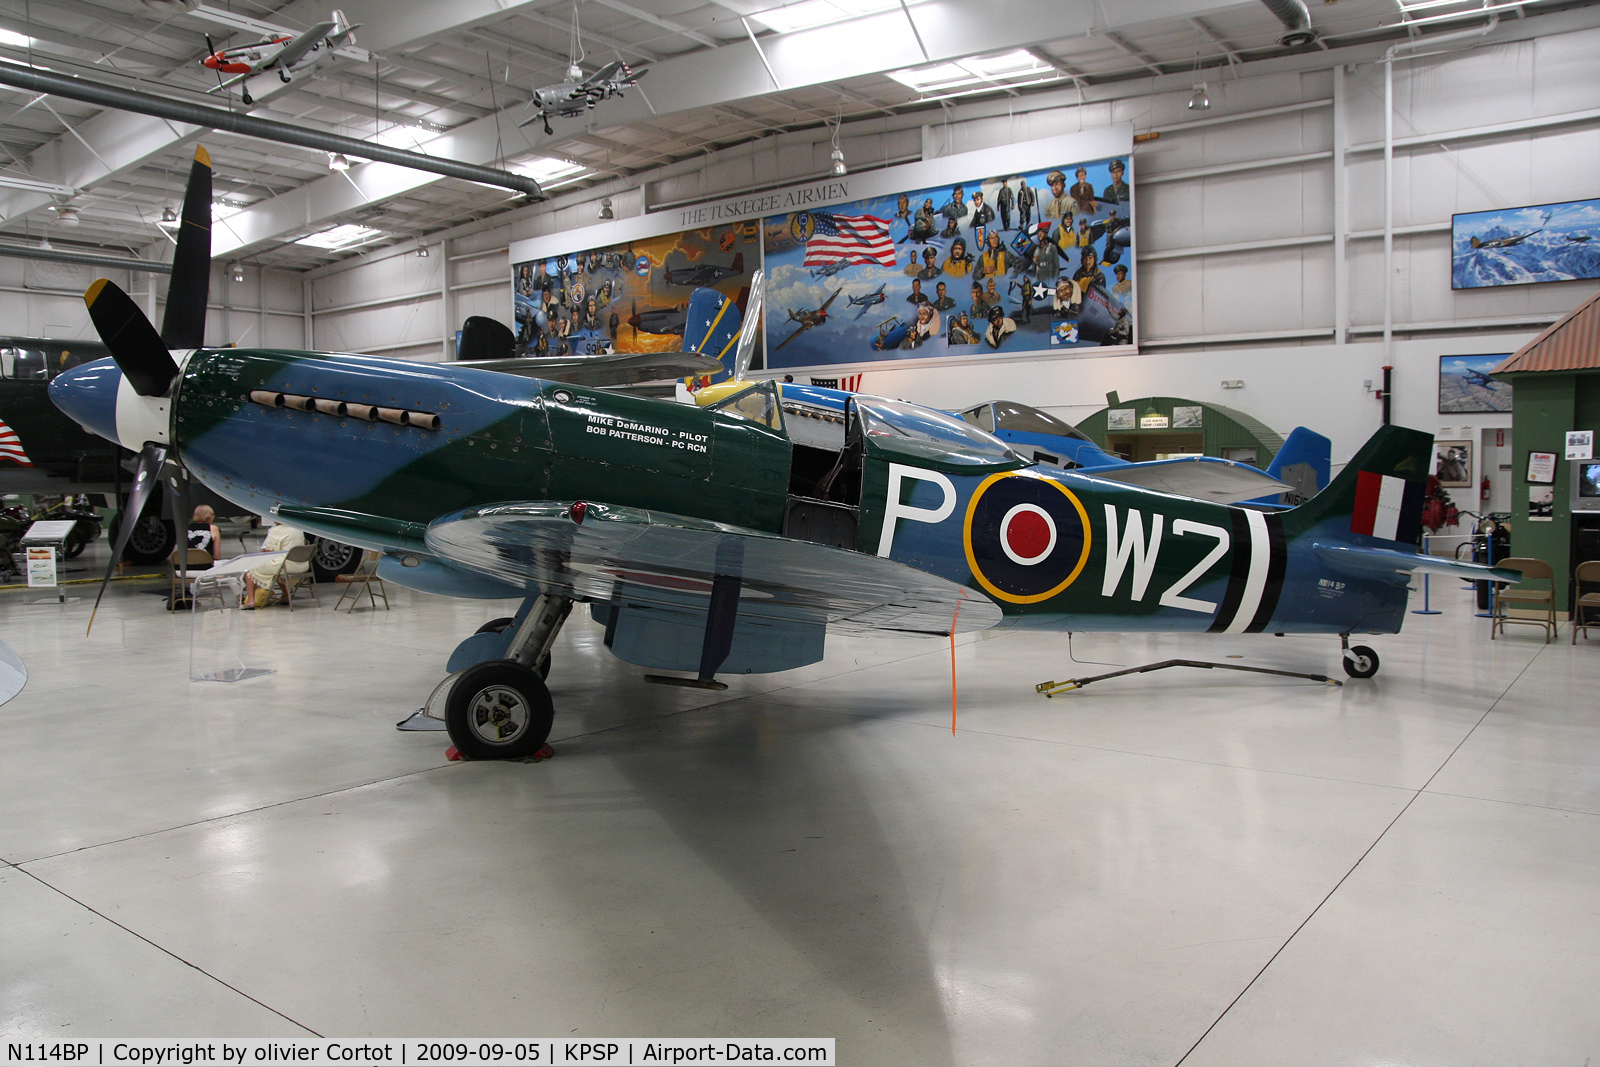 N114BP, 1945 Supermarine 379 Spitfire FR.XIVc C/N 6S/648206, Hope she will have a correct paint scheme someday...